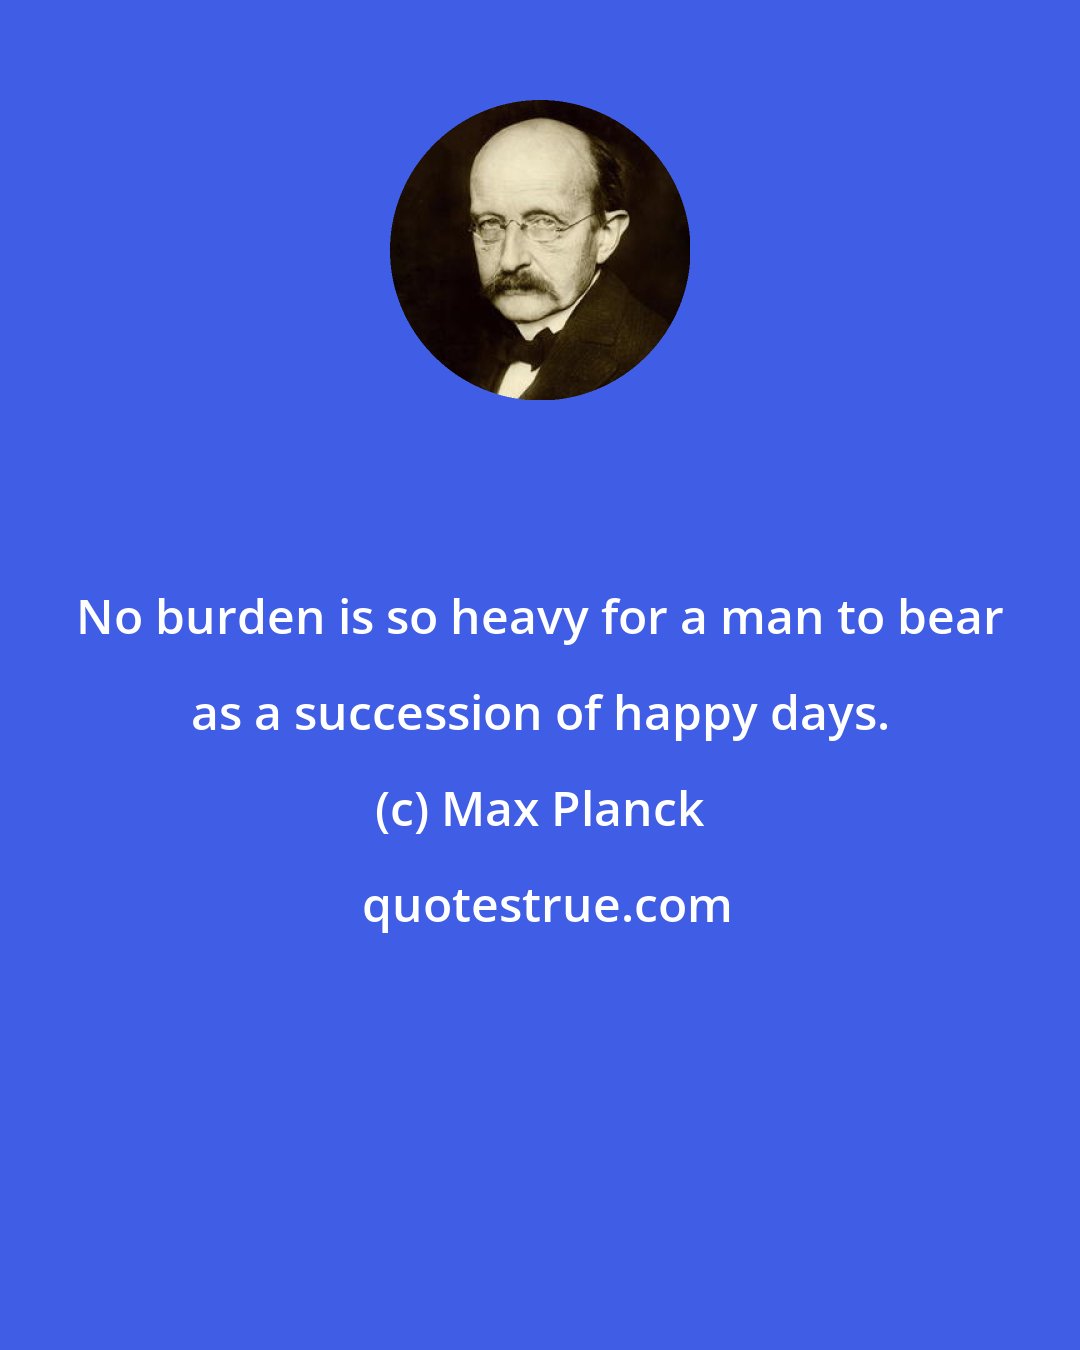 Max Planck: No burden is so heavy for a man to bear as a succession of happy days.